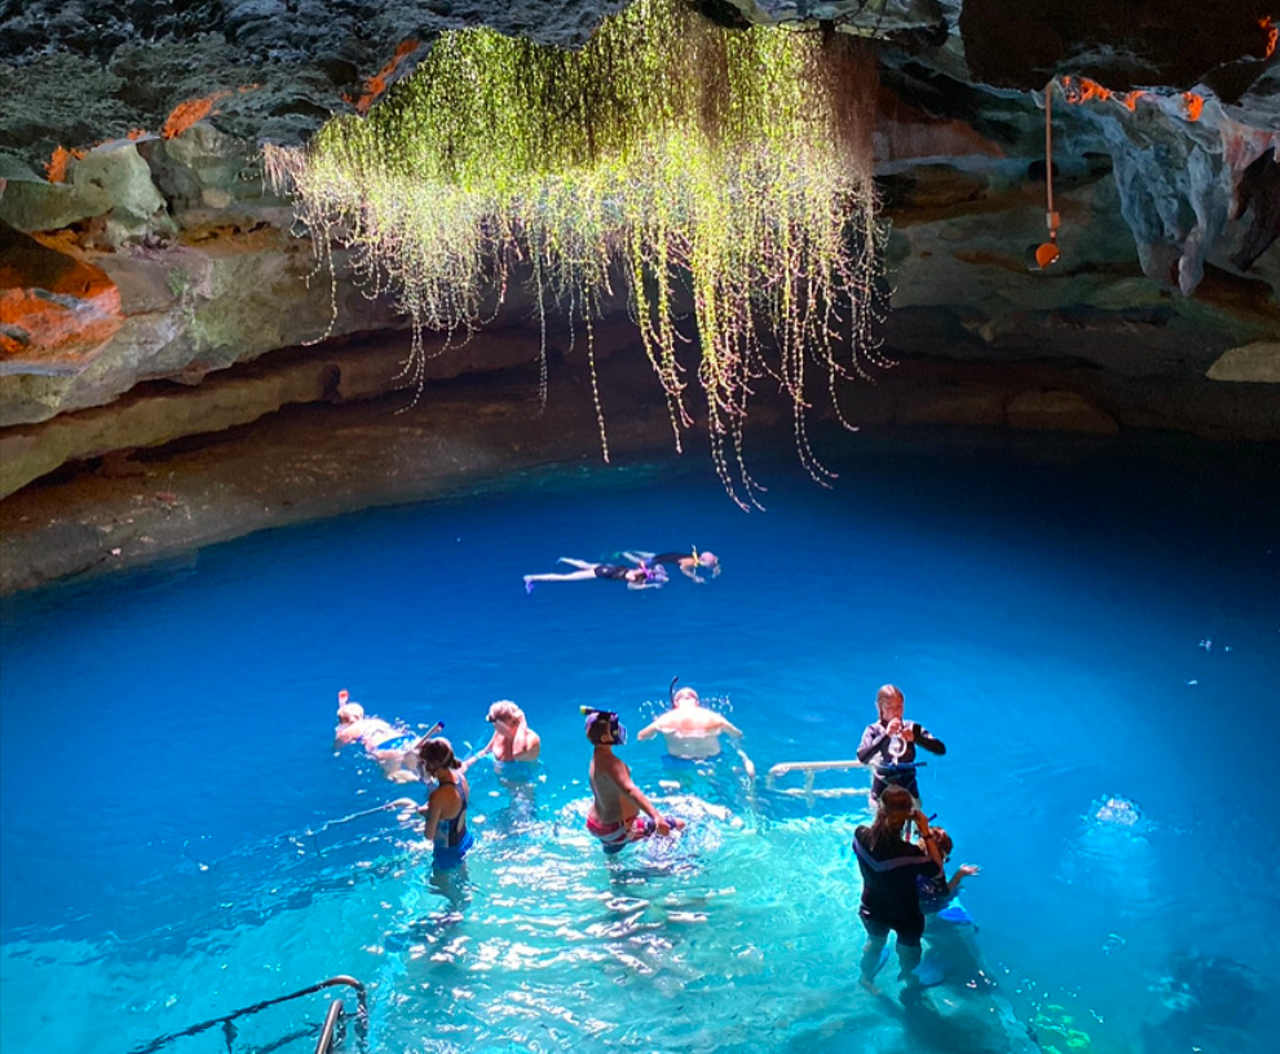 Devil’s Den
2 hours from Orlando
This Instagram-worthy North Central Florida spring gets its name from the steam (fiery smoke?) that was seen radiating off the water when it was first discovered. Now you can swim, scuba dive or snorkel in this prehistoric watery cave.